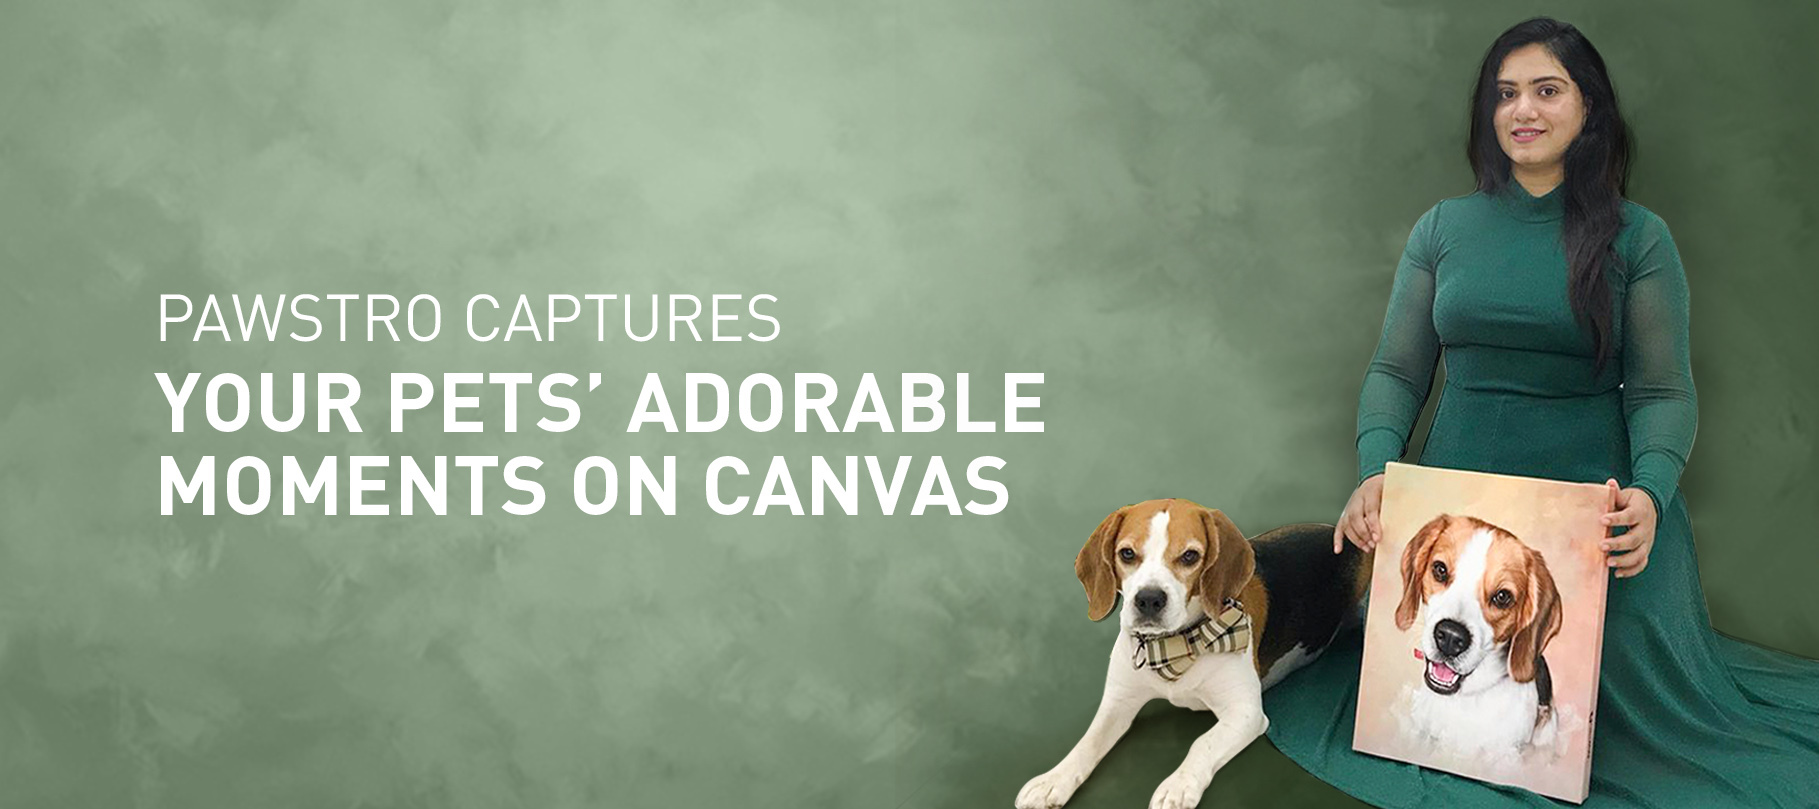 Pawstro Captures Your Pet’s Adorable Moments On Canvas